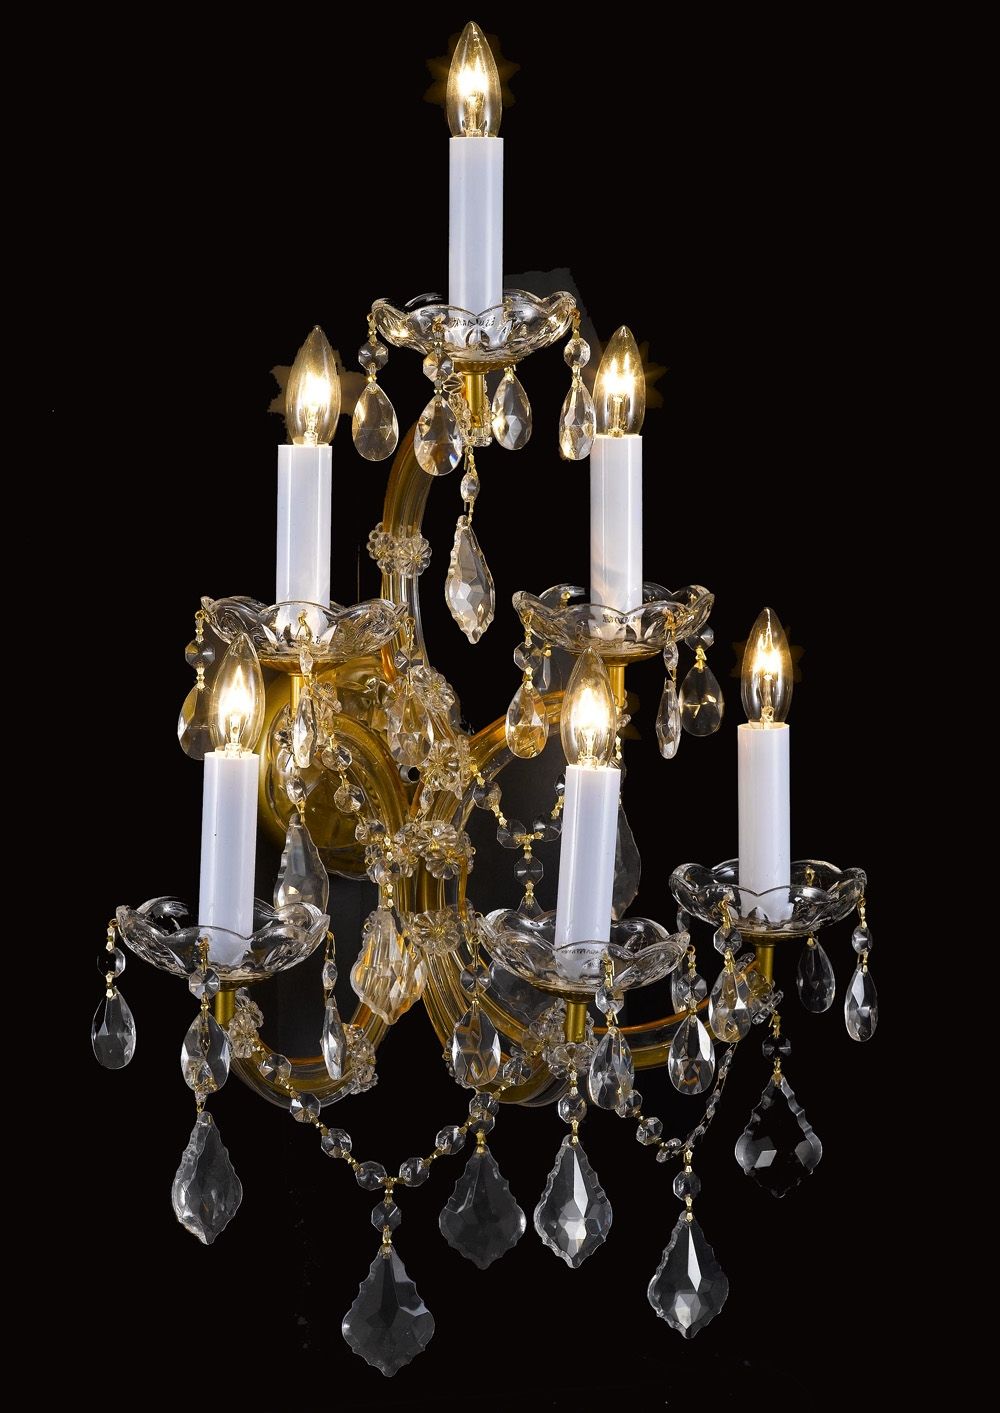 Wall Chandelier Crystal Wall Scones Wall Lighting Fixtures Within Chandelier Wall Lights (View 3 of 12)